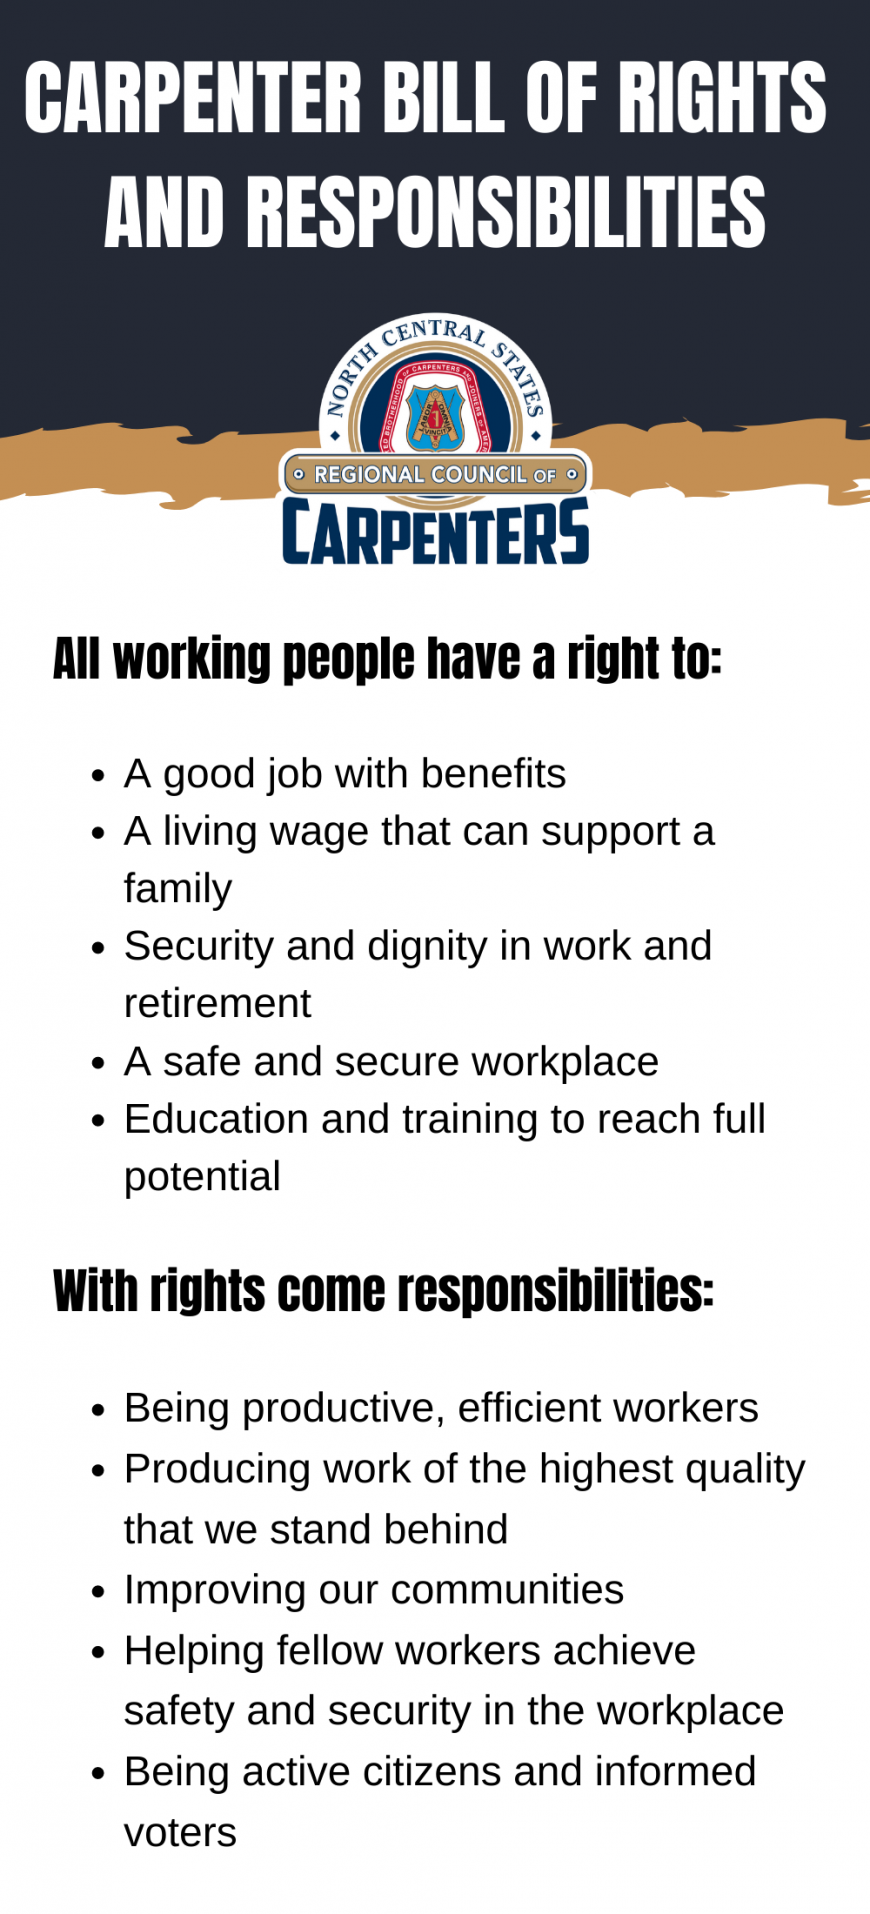 Carpenters Bill of Rights and Responsibilities